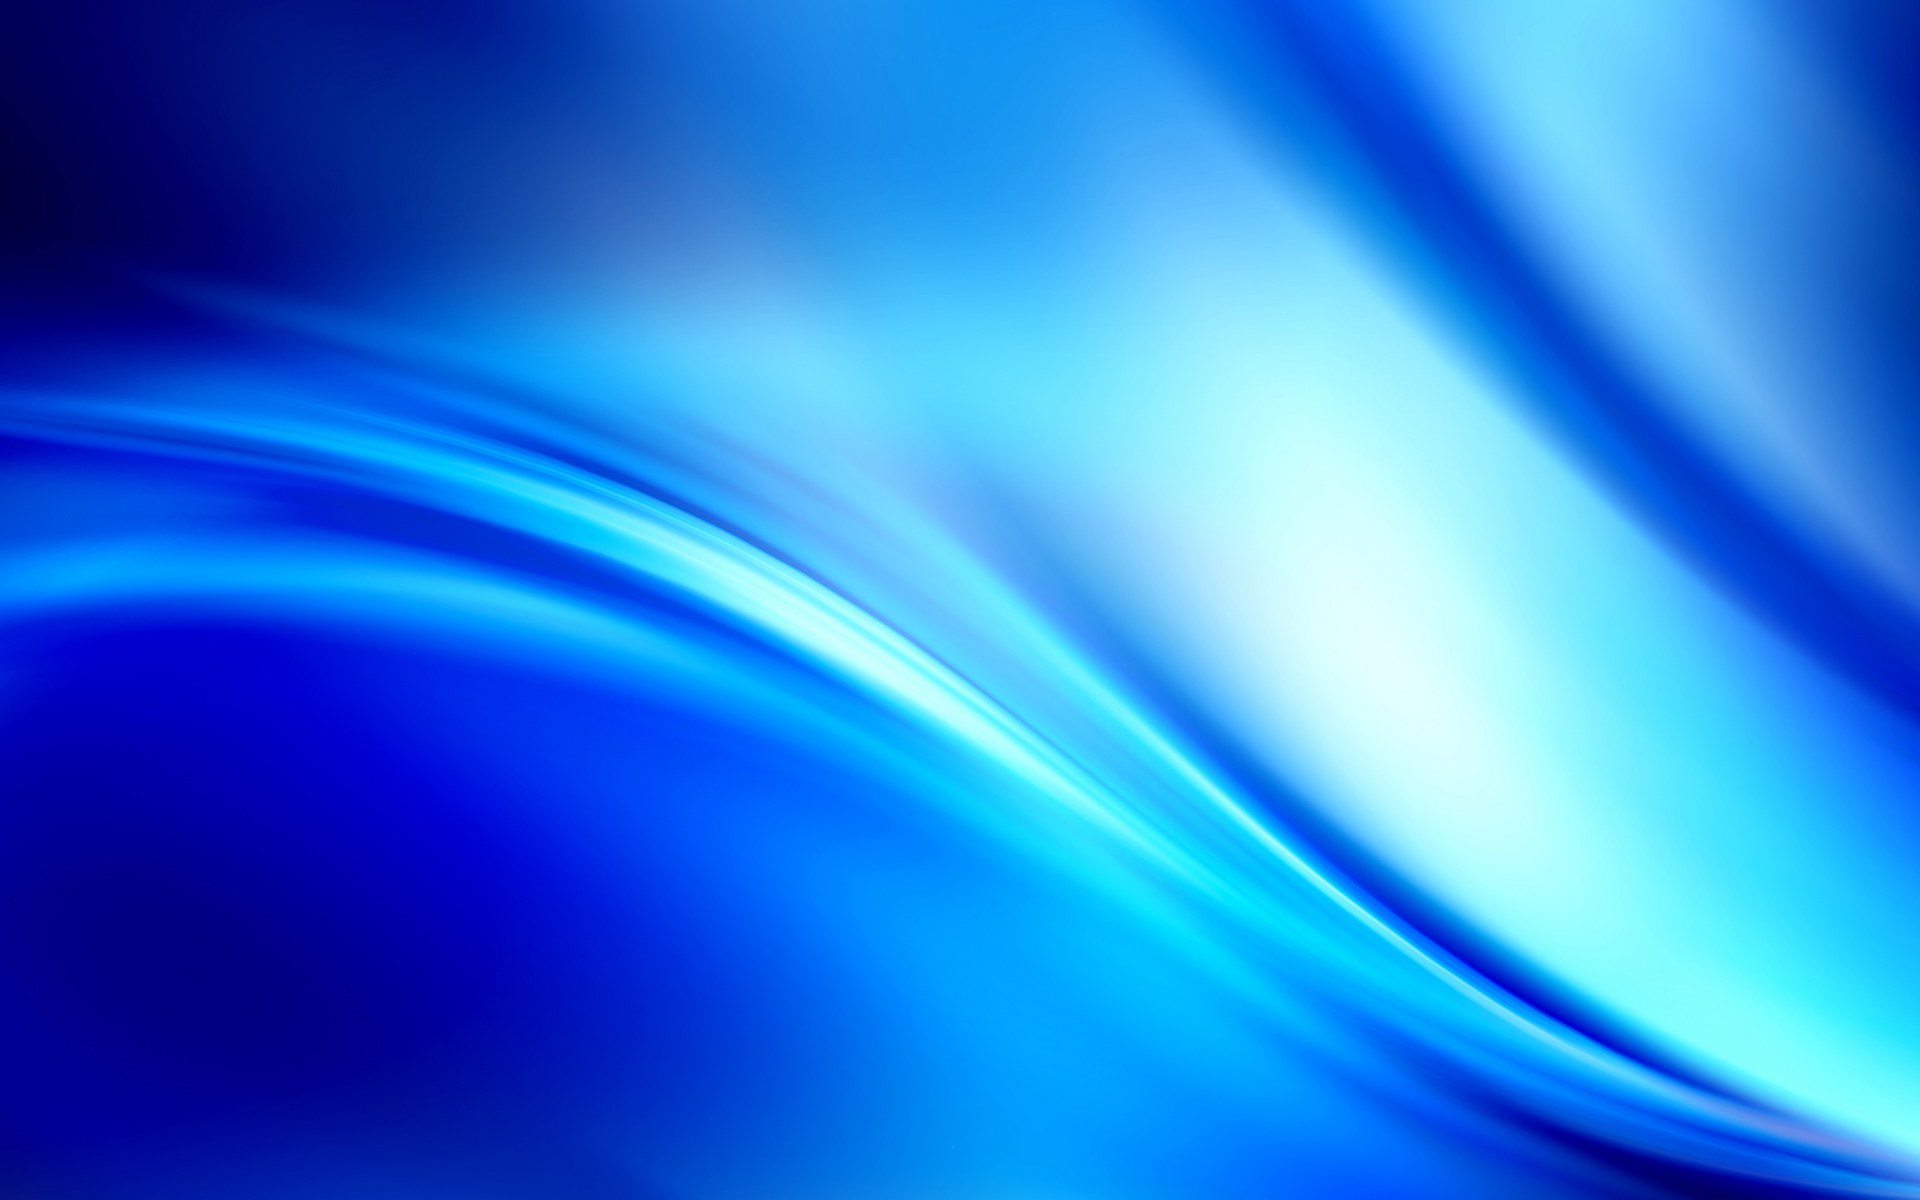 Abstract Backgrounds Blue 1984 Hd Wallpapers in Abstract   Imagesci